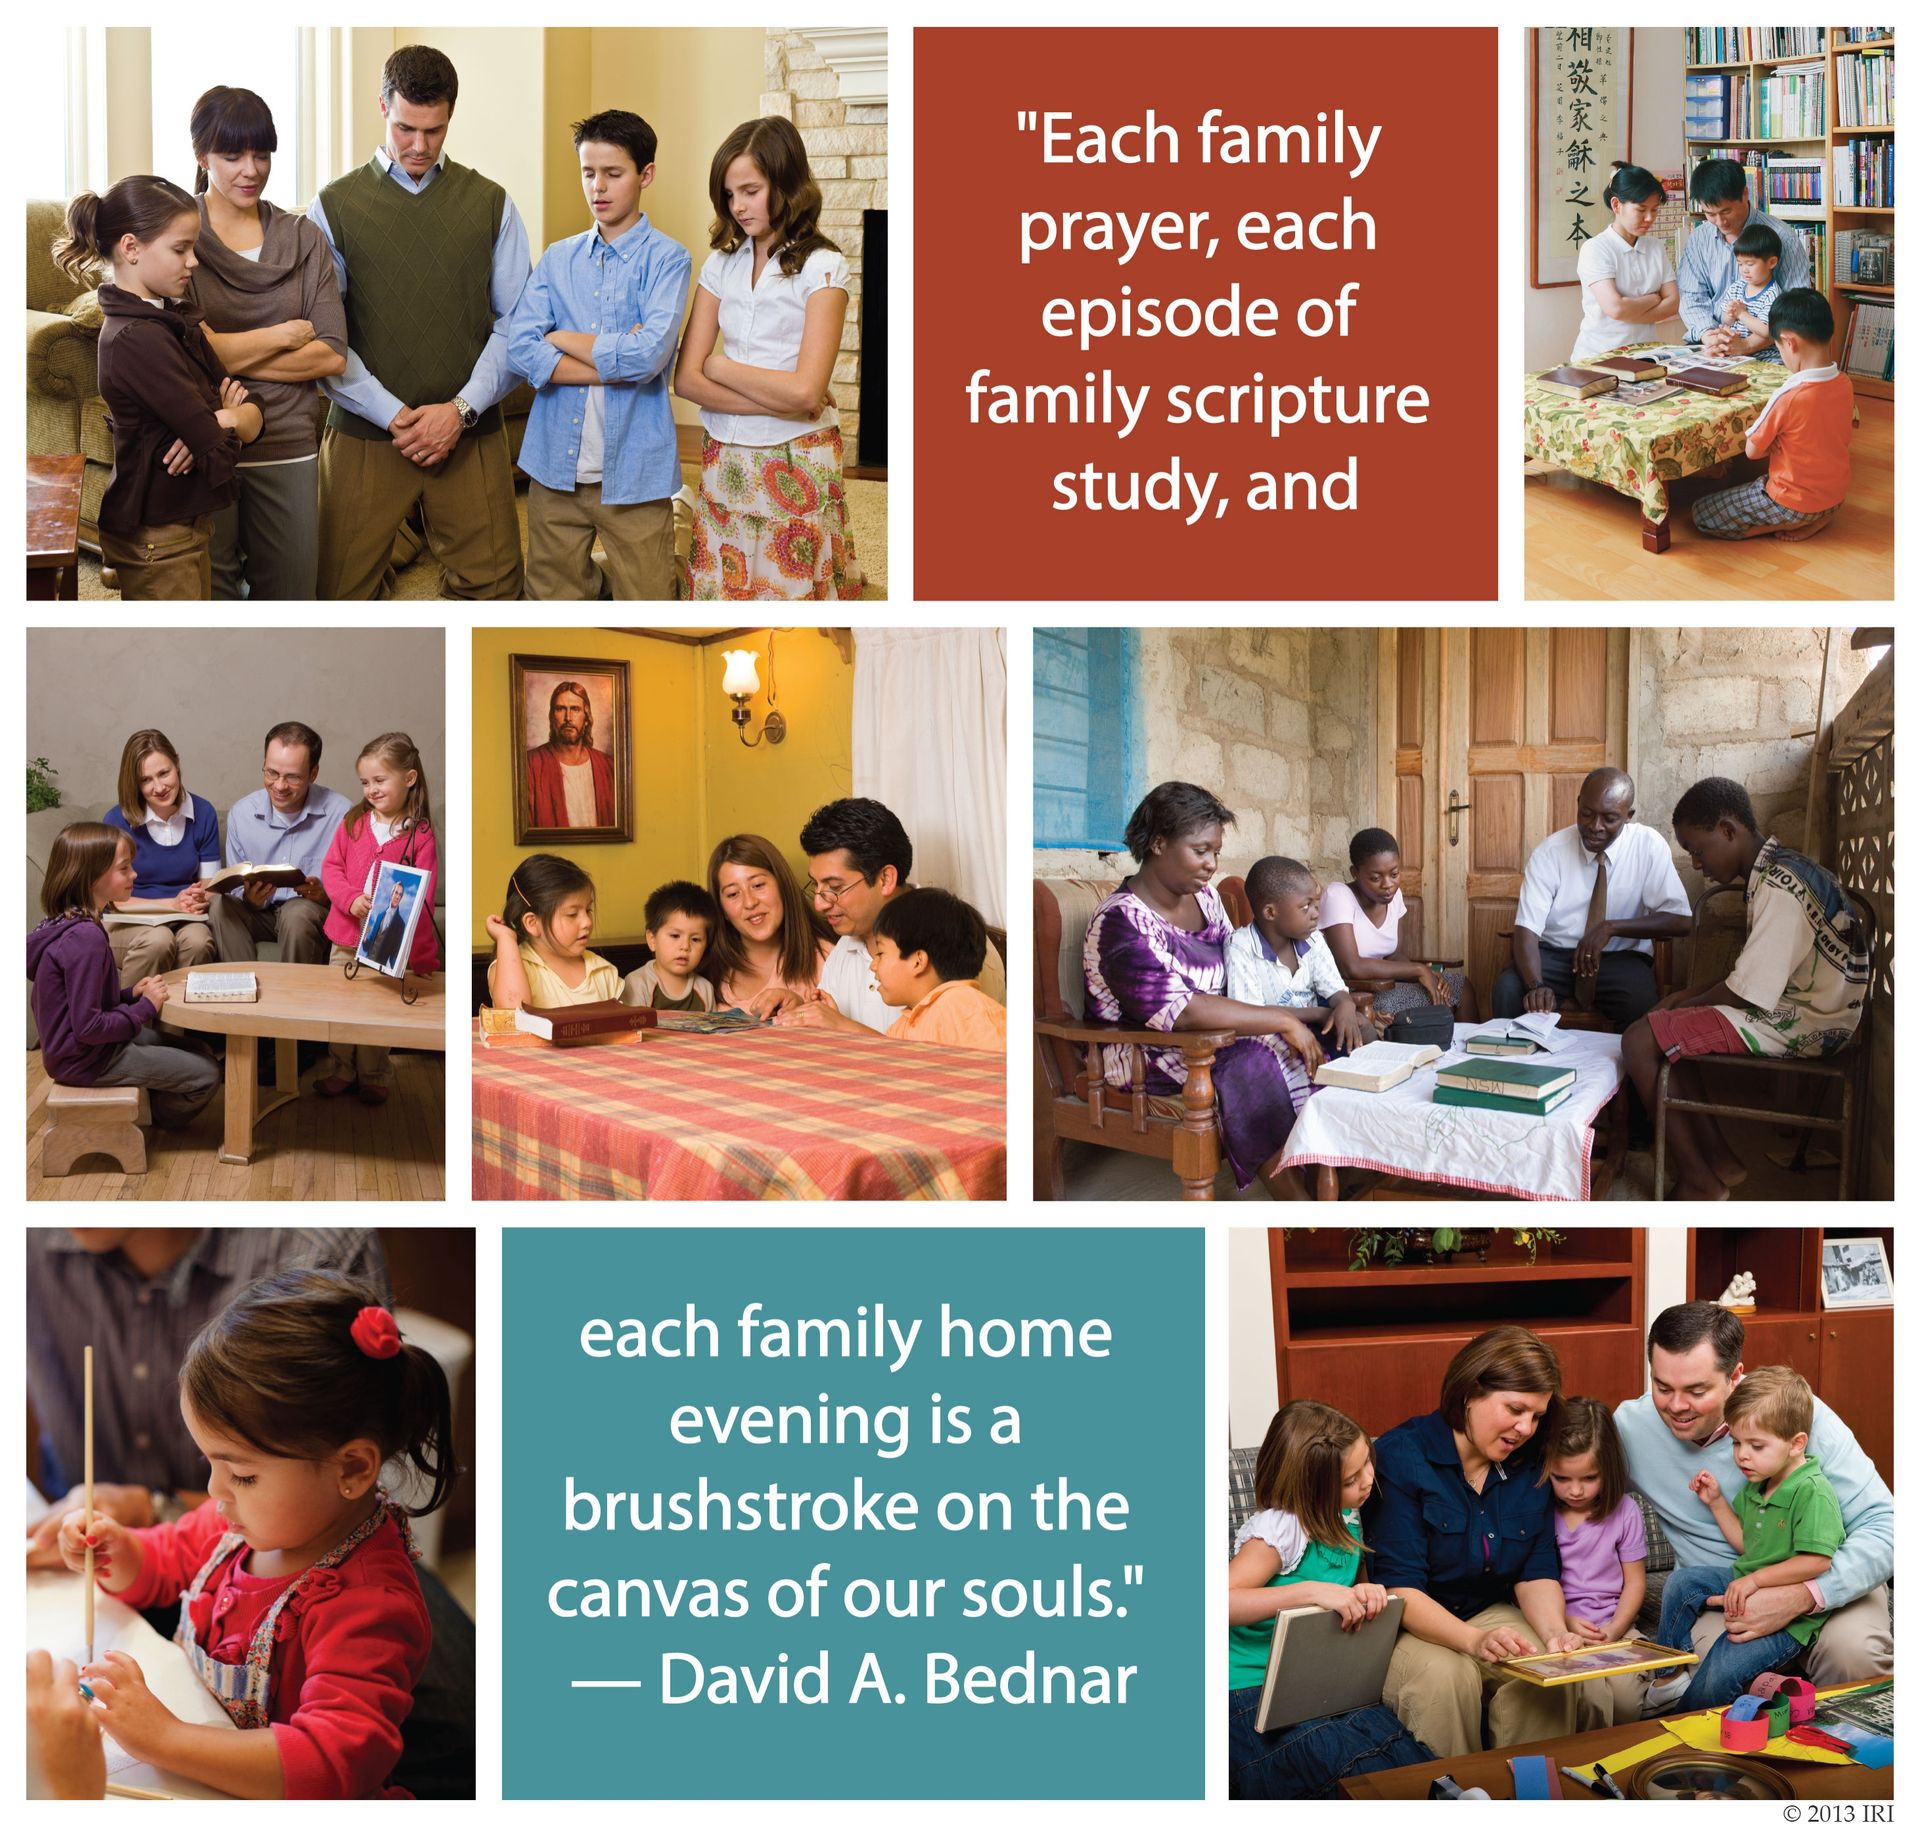 “Each family prayer, each episode of family scripture study, and each family home evening is a brushstroke on the canvas of our souls.”—Elder David A. Bednar, “More Diligent and Concerned at Home” © undefined ipCode 1.